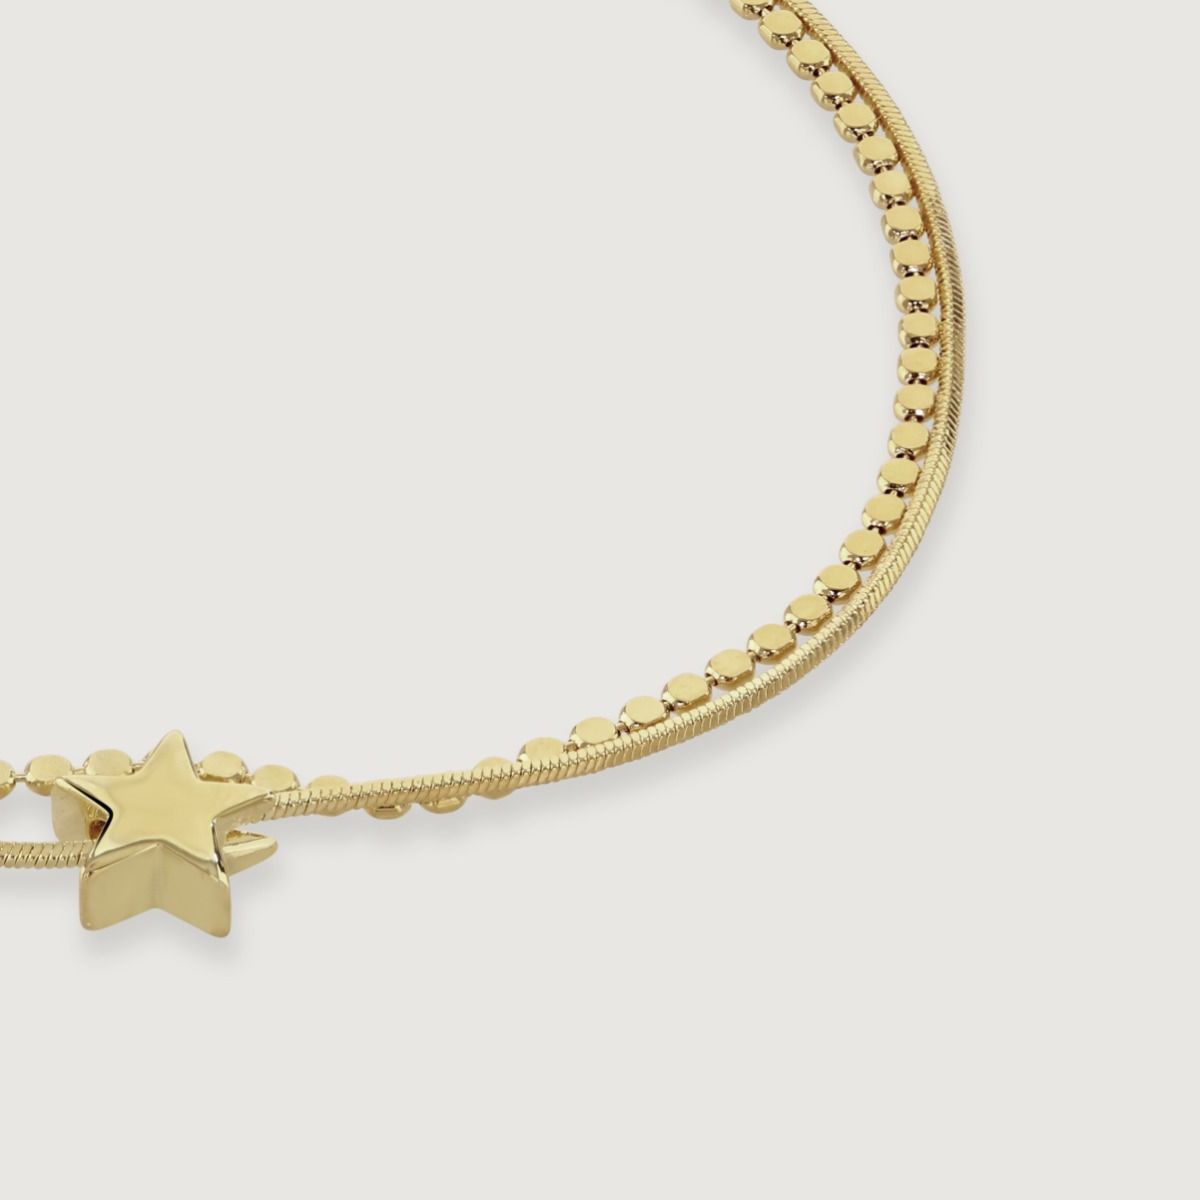 Elevate your style with this stunning double chain bracelet adorned with a star charm. Its delicate design adds a touch of celestial elegance to any outfit. Handcrafted with meticulous detail, it serves as a reminder to reach for the stars and embrace you